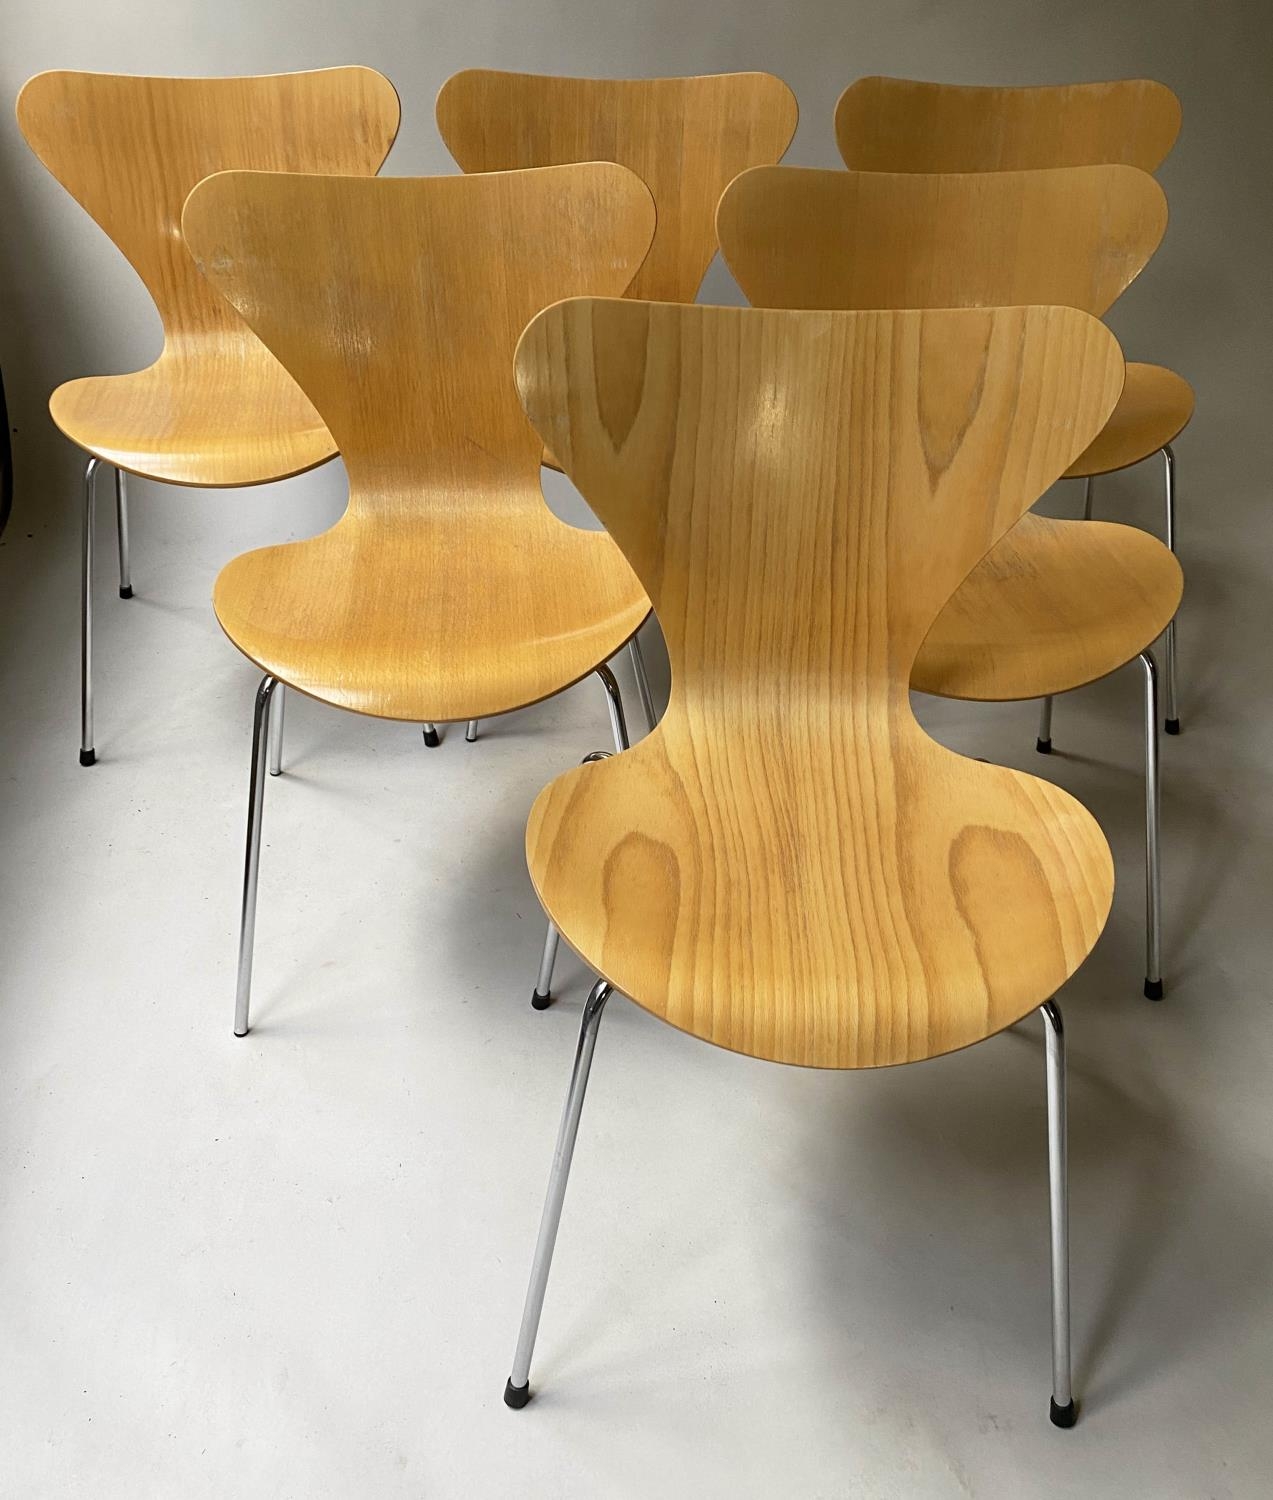 FRITZ HANSEN SERIES 7 DINING CHAIRS, a set of six, by Arne Jacobsen, bentwood and stacking ( - Image 7 of 7